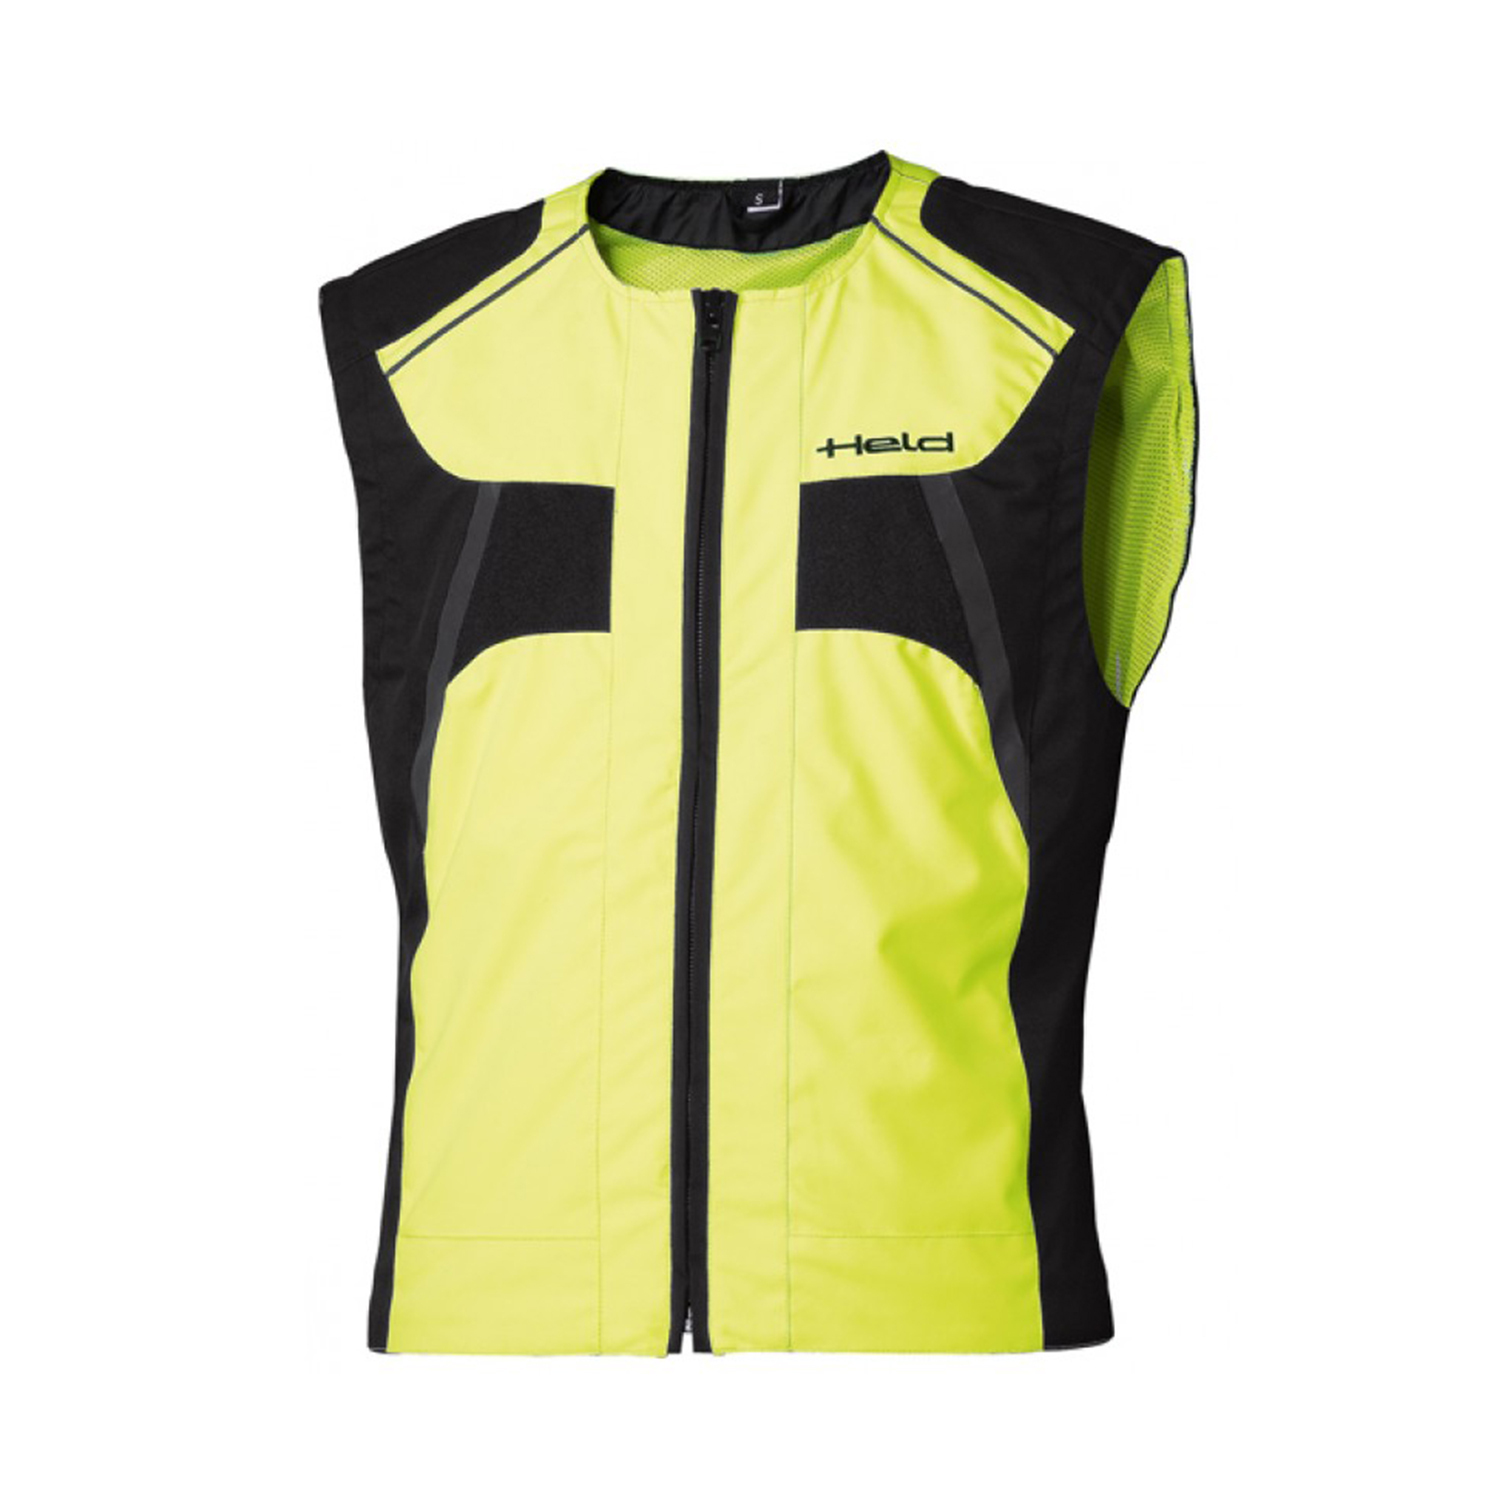 Held Flashlight Vest - Available in Various Sizes